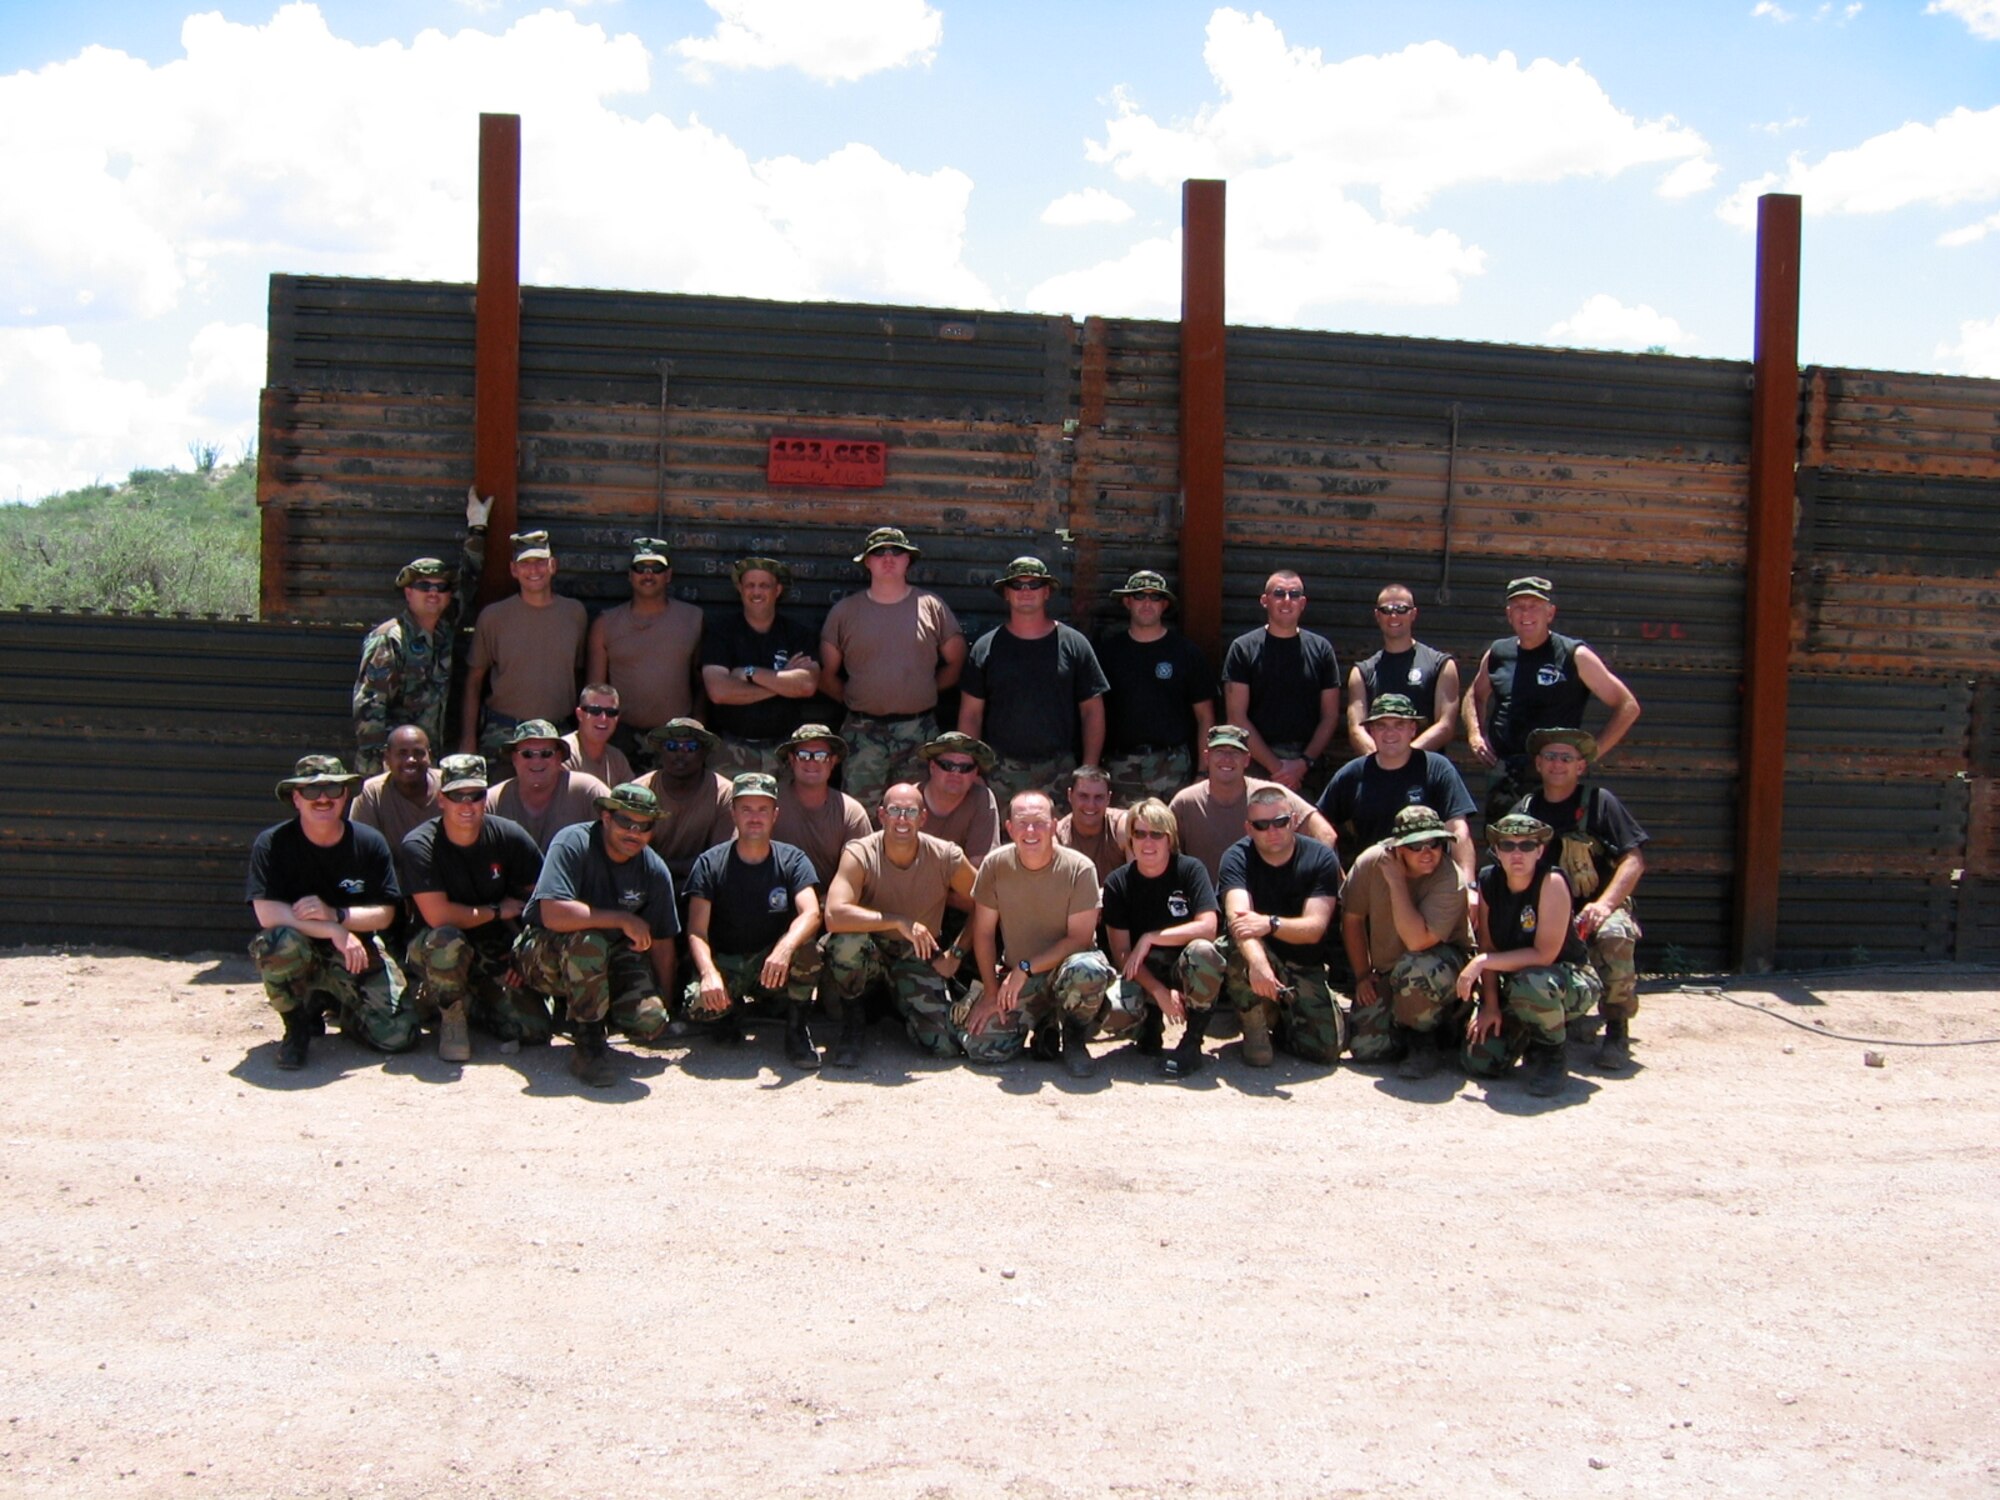 Members of the 123rd Civil Engineering Squadron in front of the border.
(Photos courtesy 123rd Maintenance Squadron and 123rd Civil Engineering Squadron)